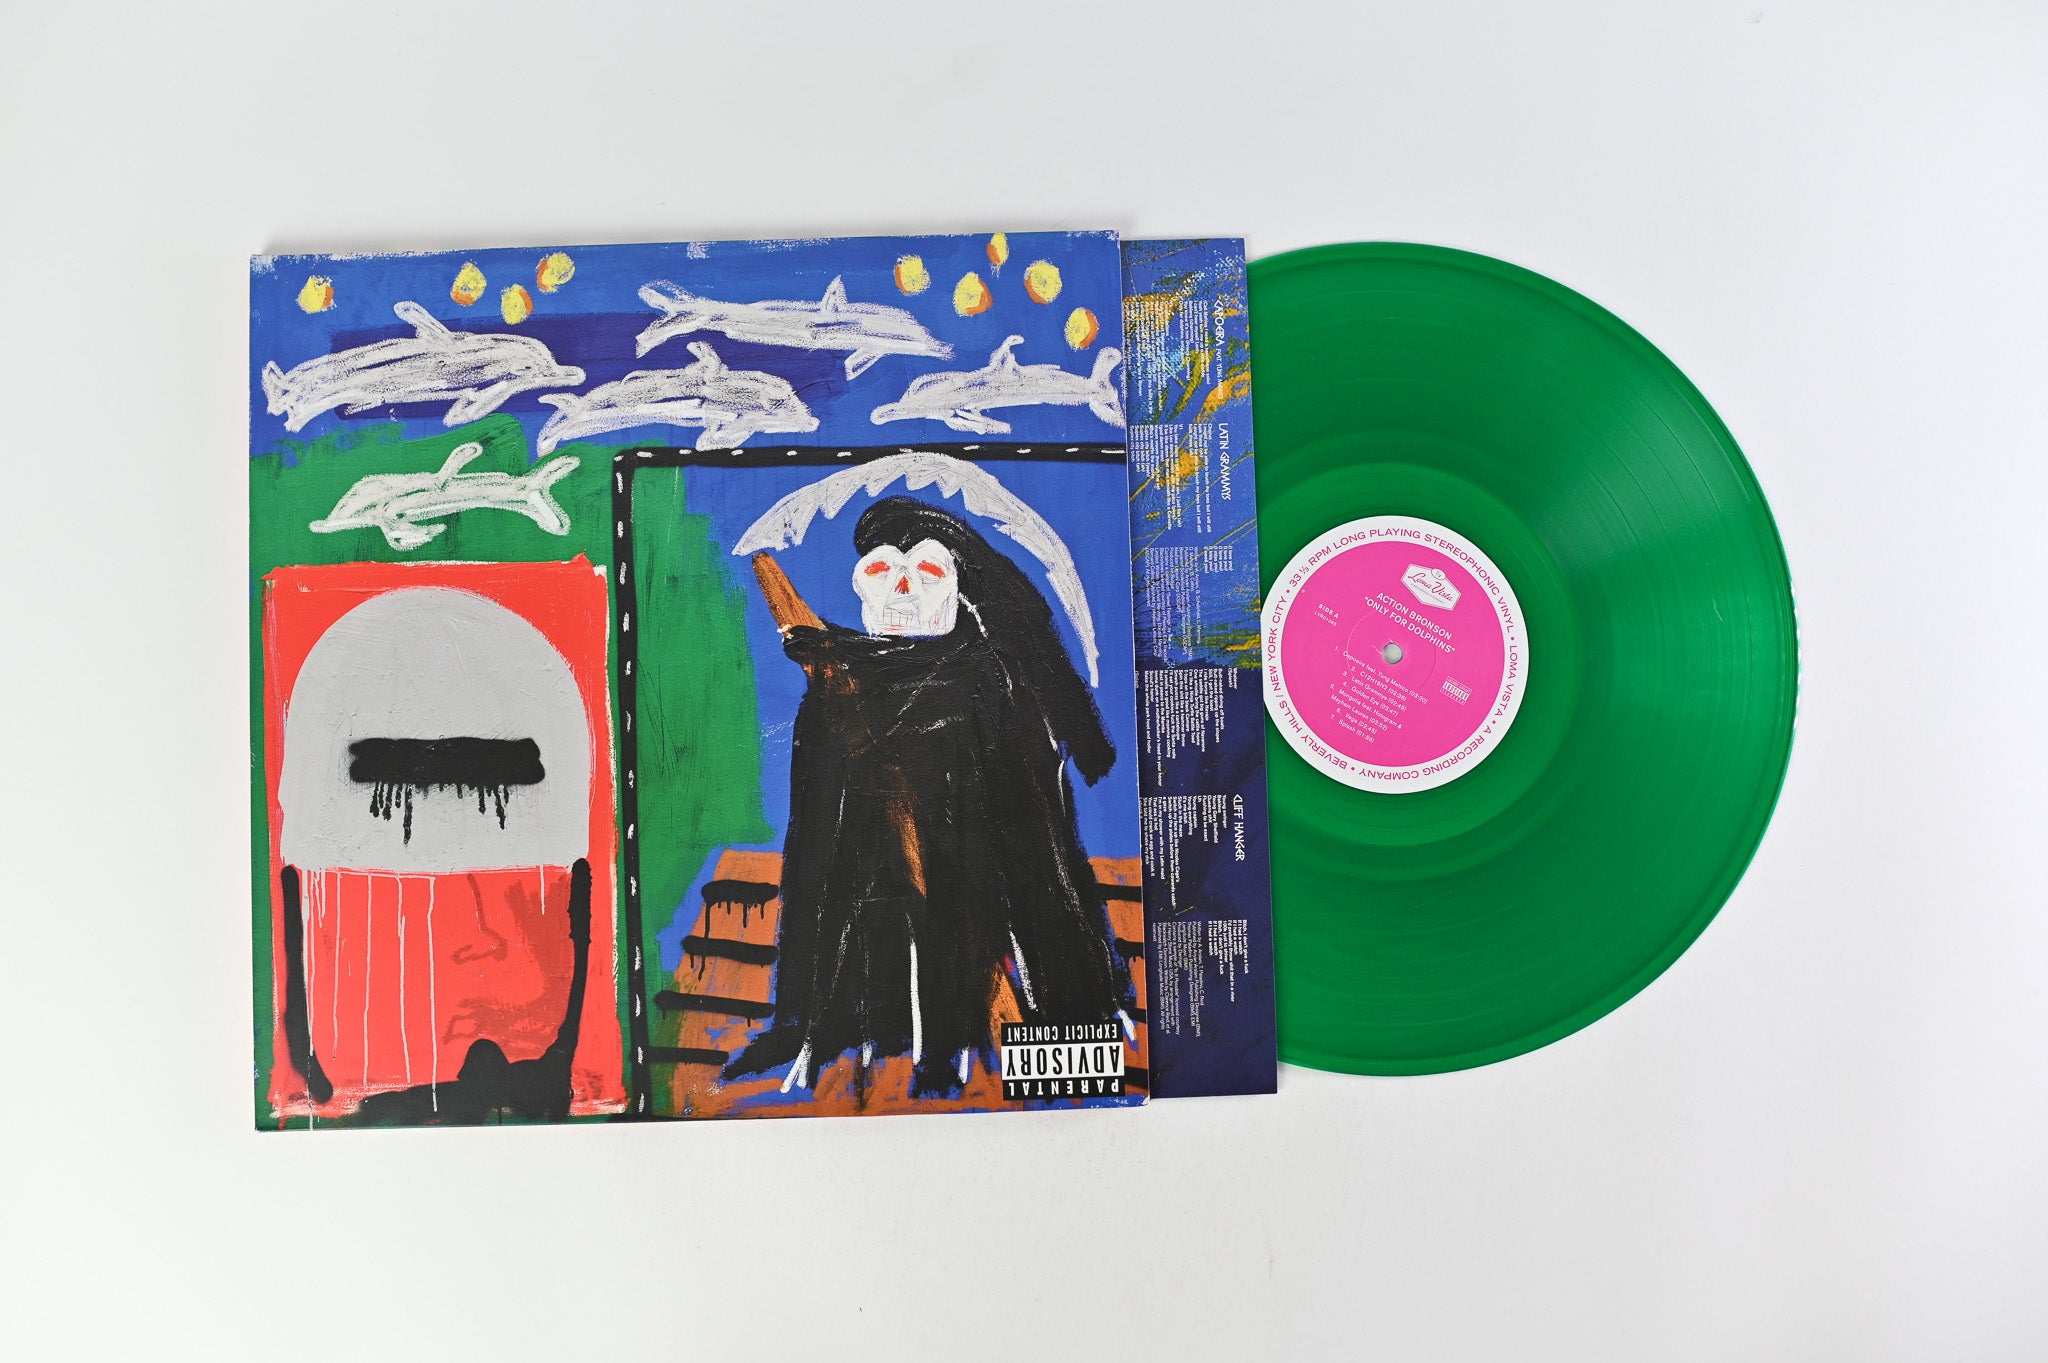 Action Bronson - Only For Dolphins on Loma Vista Green Translucent Vinyl